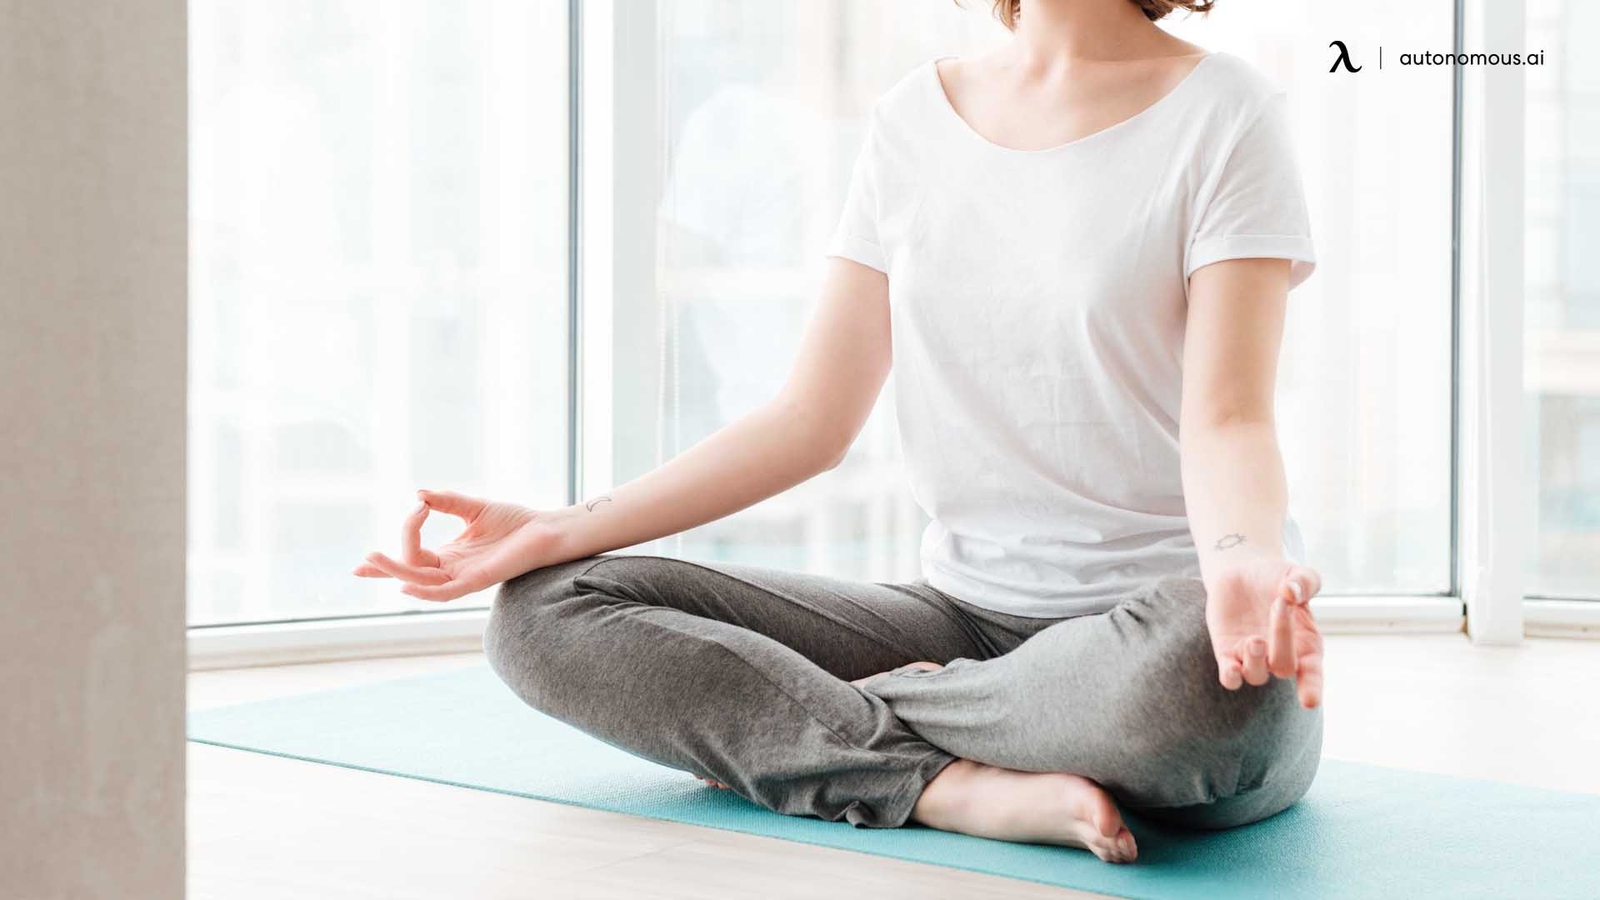 Meditation Exercises You Can Do Right at Your Desk to Stay Productive